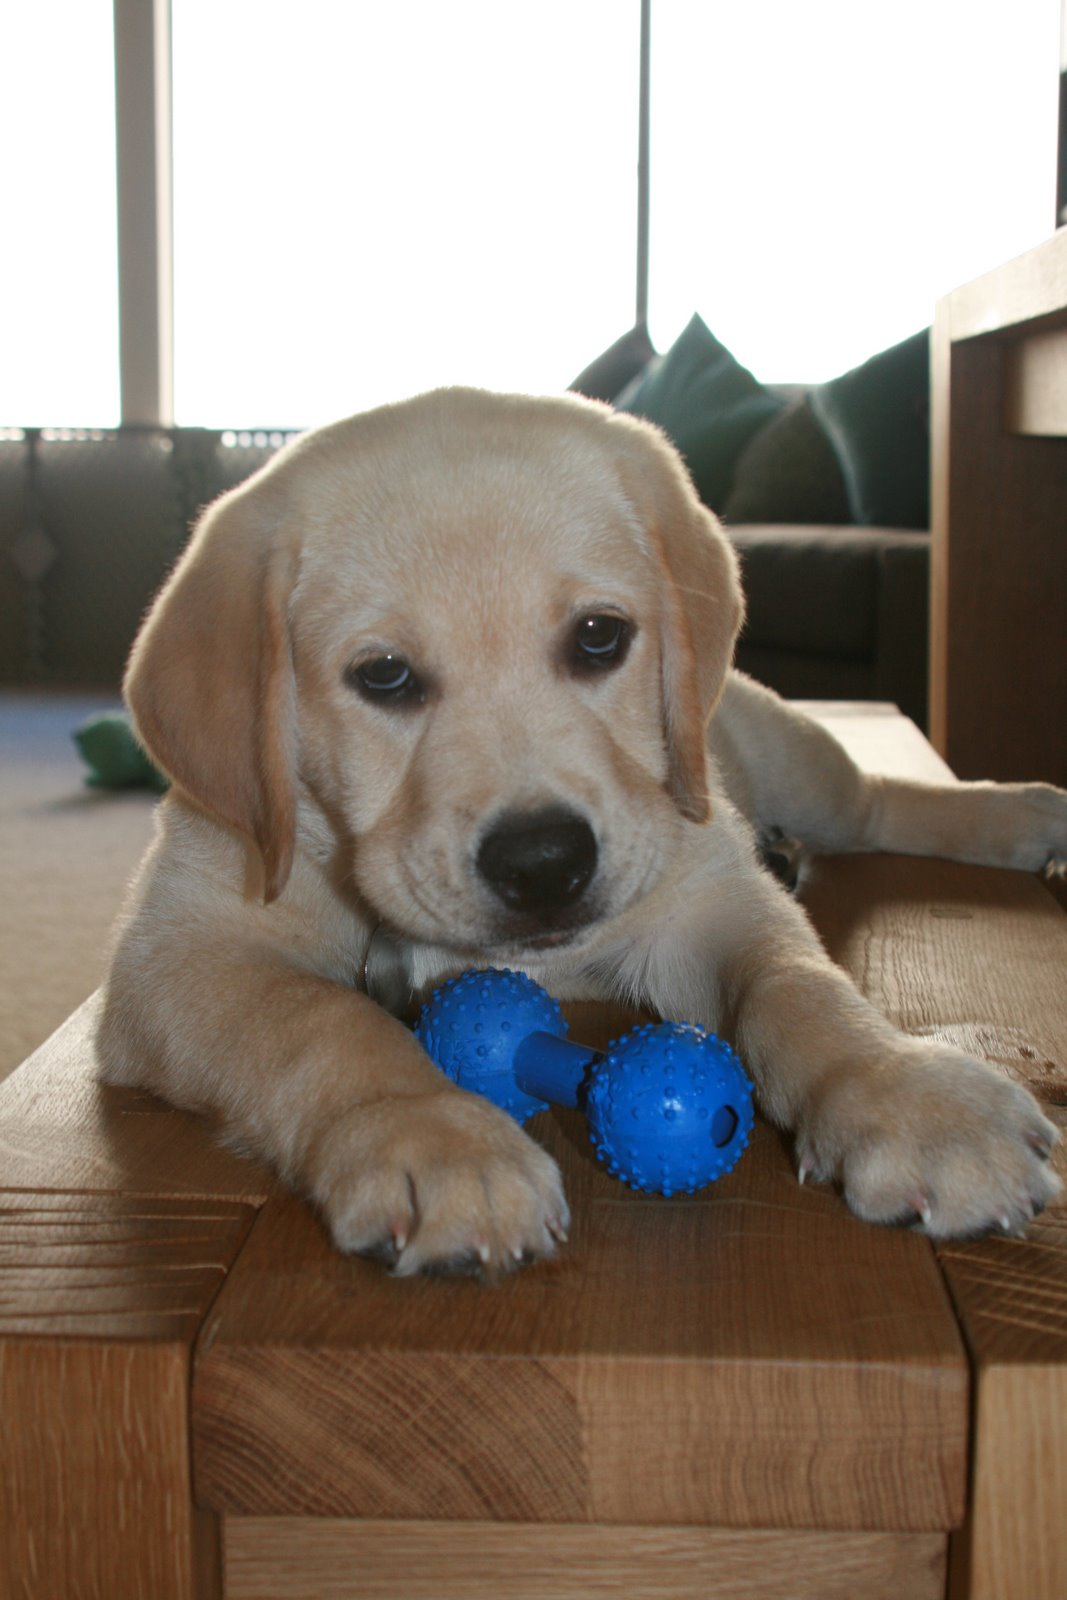 [Cute+yellow+labrador+puppy+Cooper+on+the+bench+with+his+blue+toy.JPG]